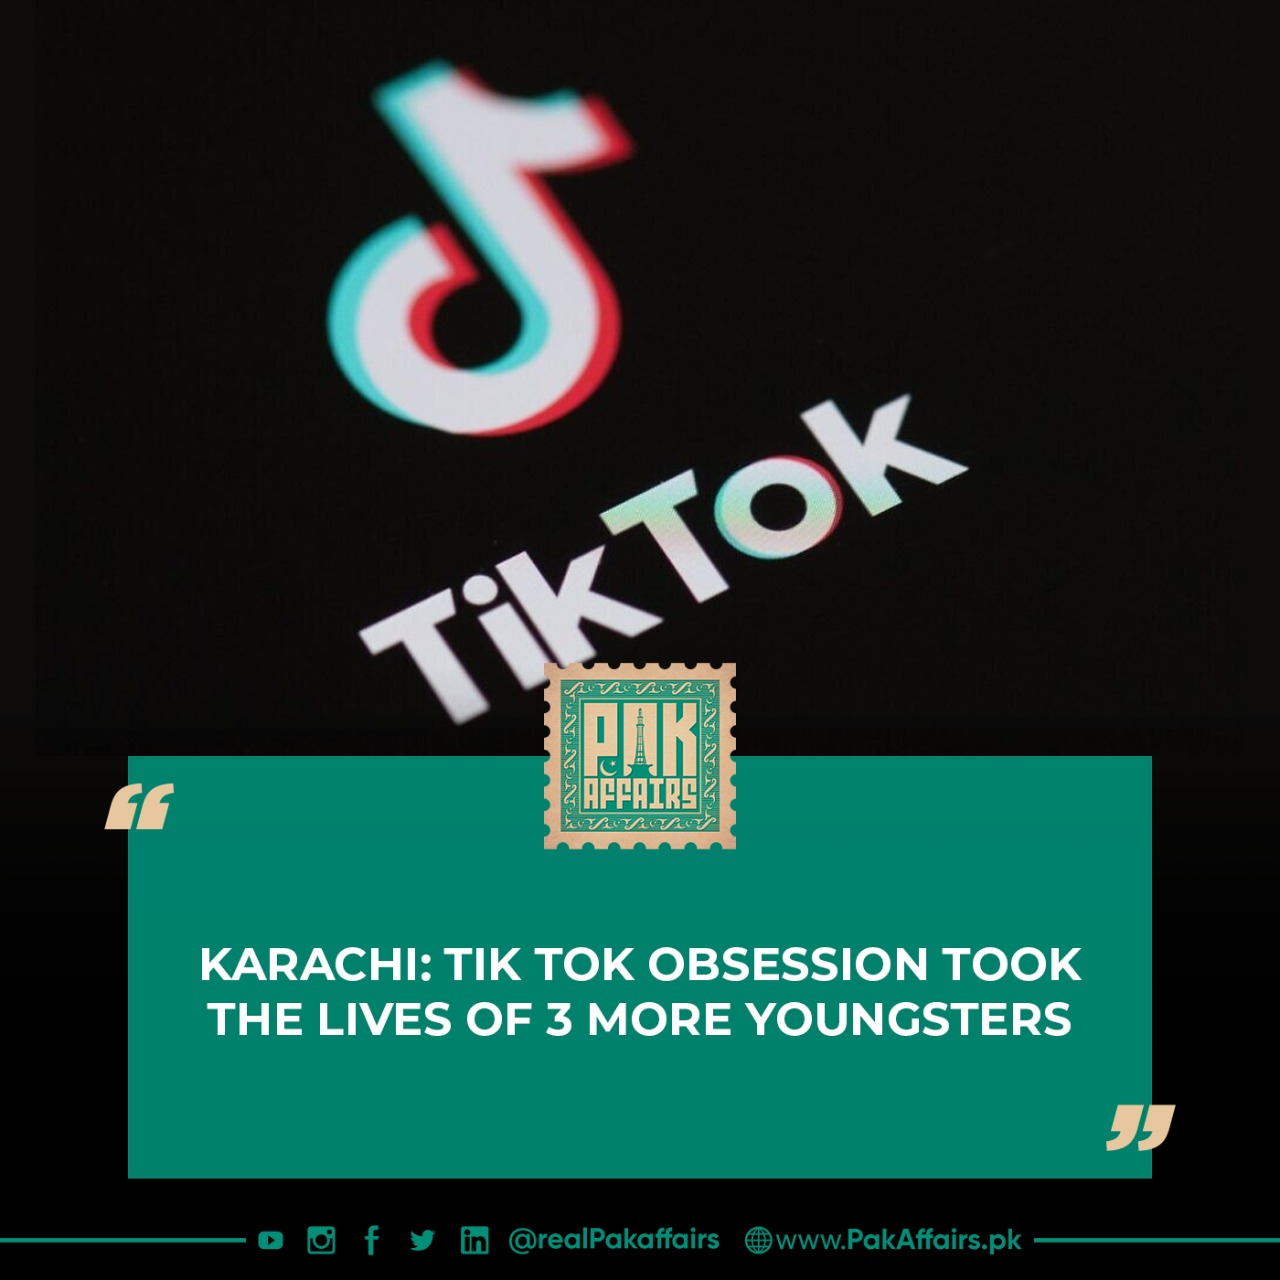 Karachi: Tik Tok obsession took the lives of 3 more youngsters